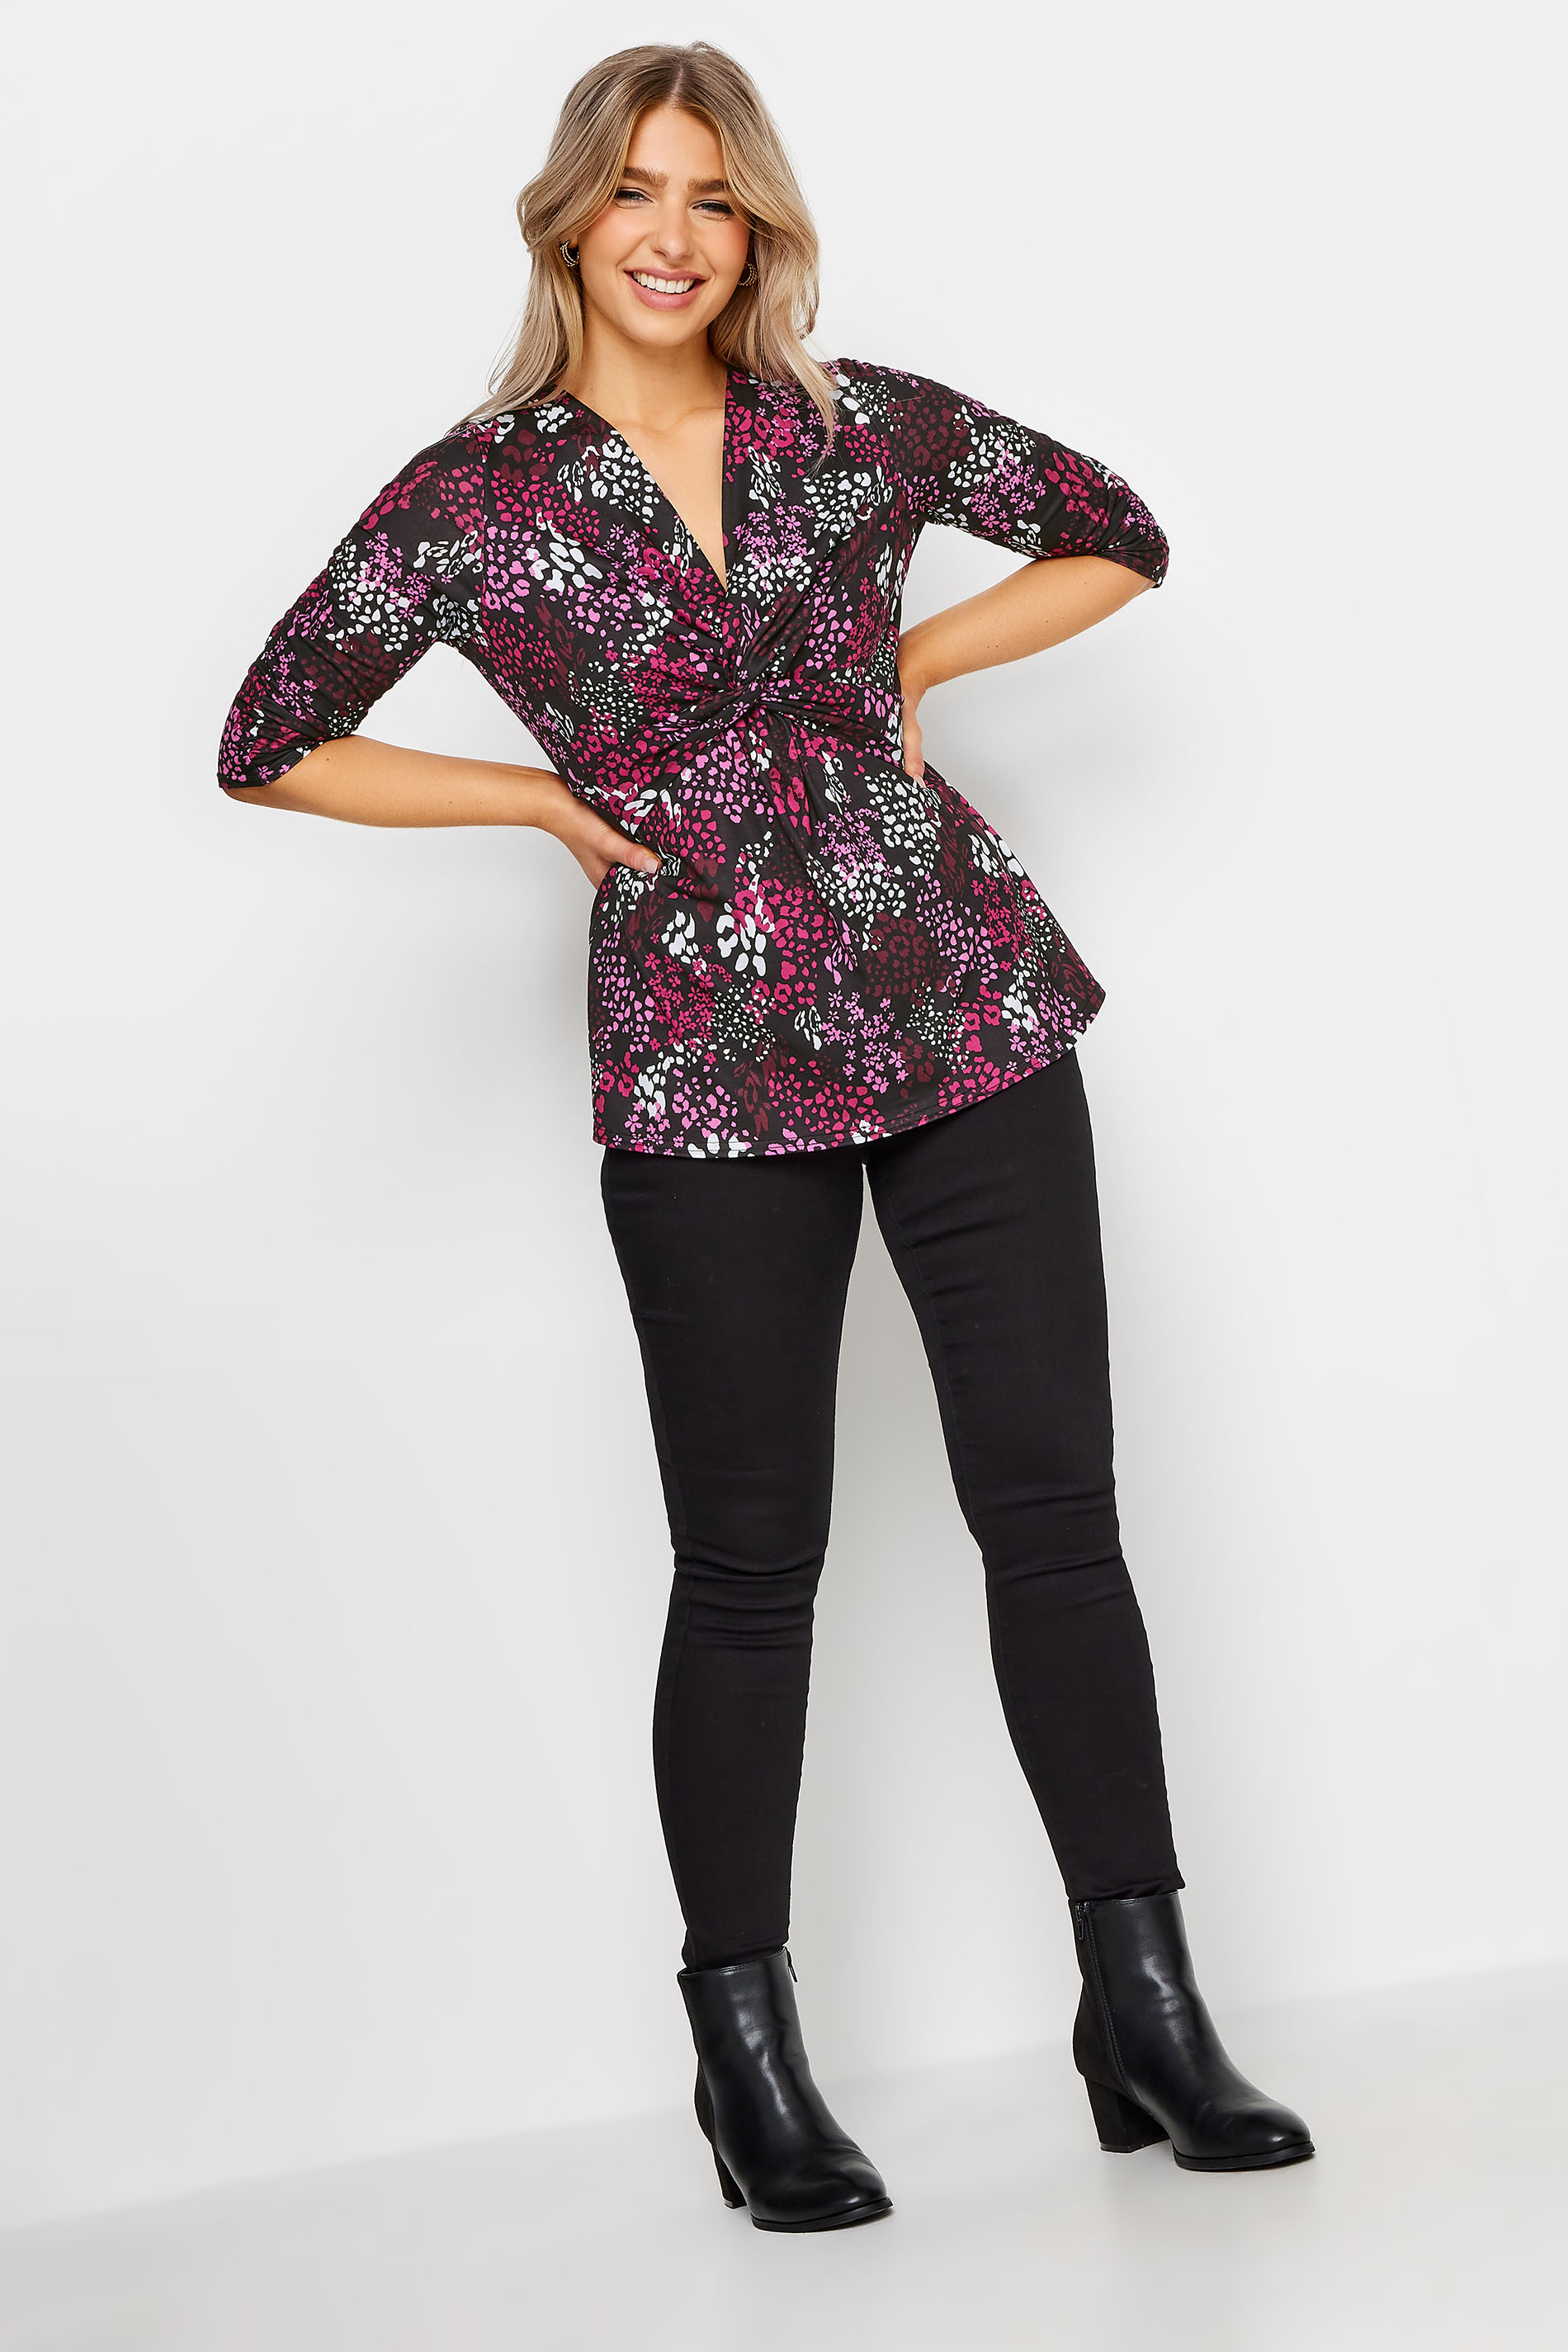 M&Co Pink Animal Print Twist Front Top | M&Co 3